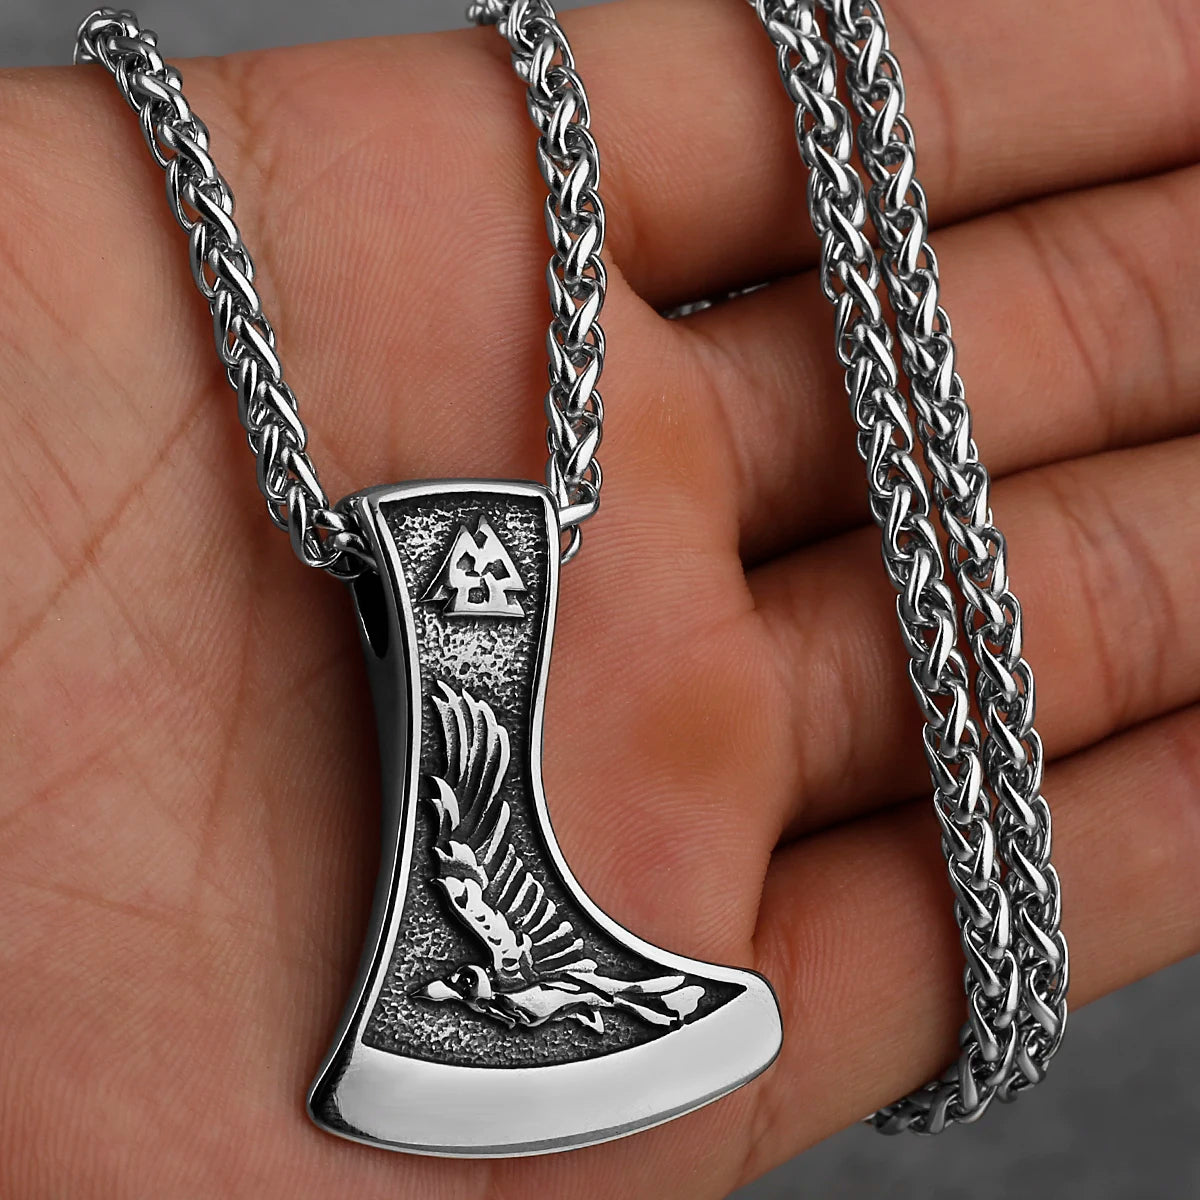 Viking Axe Necklace Pendant - Mythical Pieces Only Pendant / WJ 105